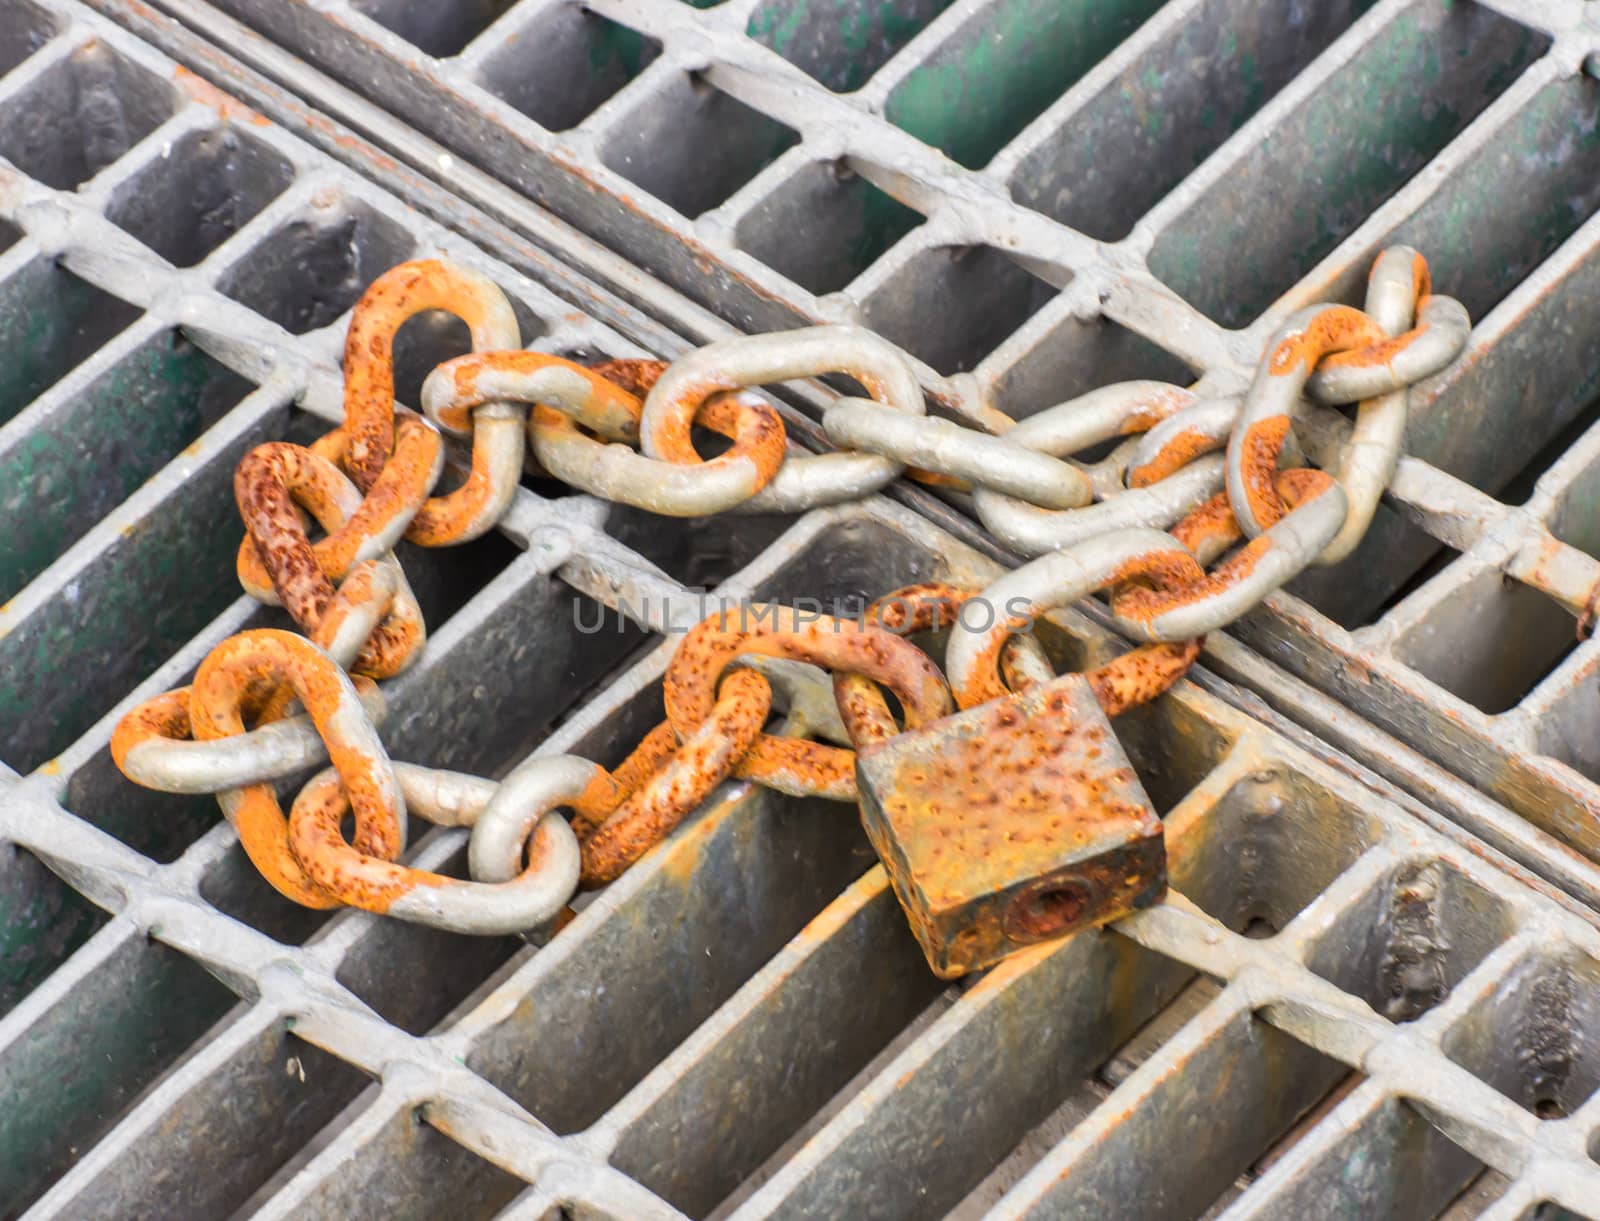 Lock and chain on a steel ,Close up view of a large lock and chain on a steel have the rust.